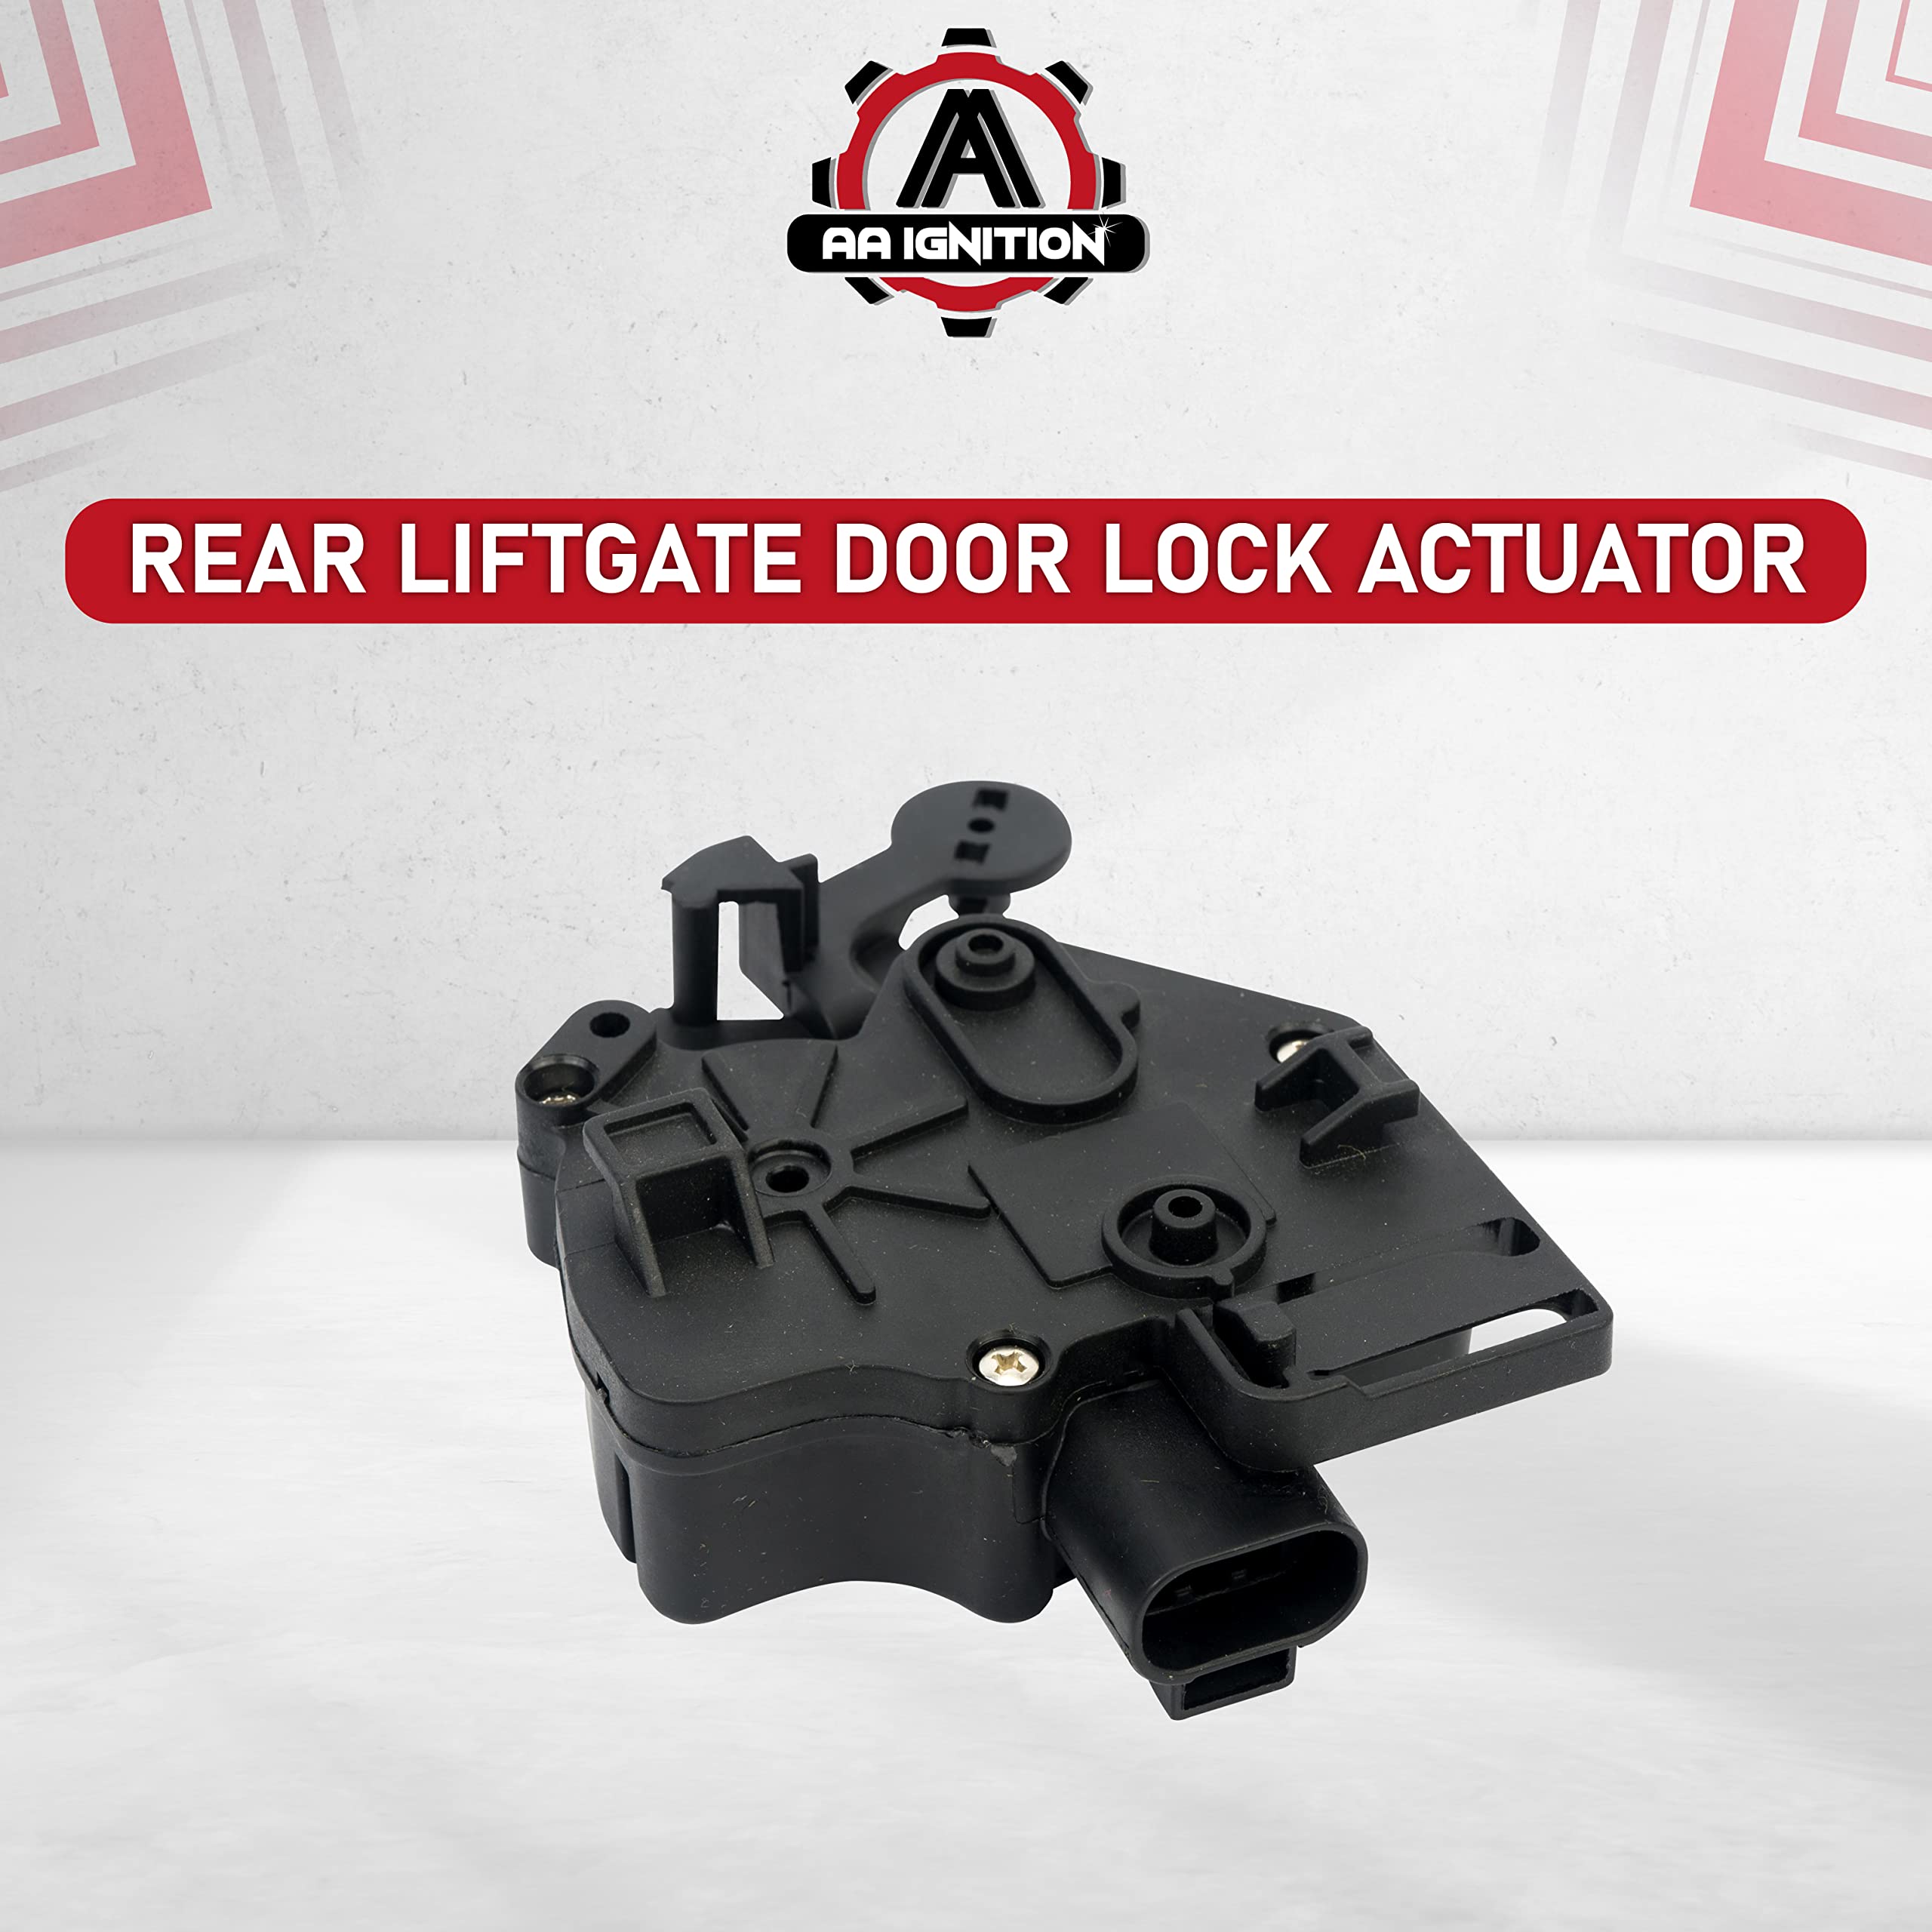 AA Ignition Rear Liftgate Door Lock Actuator - Replaces 15250765, 15808595, 746015, 25001736 - Compatible with Chevy, GMC, Cadillac Vehicles - Tahoe, Suburban, Yukon, Denali, Escalade, ESV, EXT  - Very Good